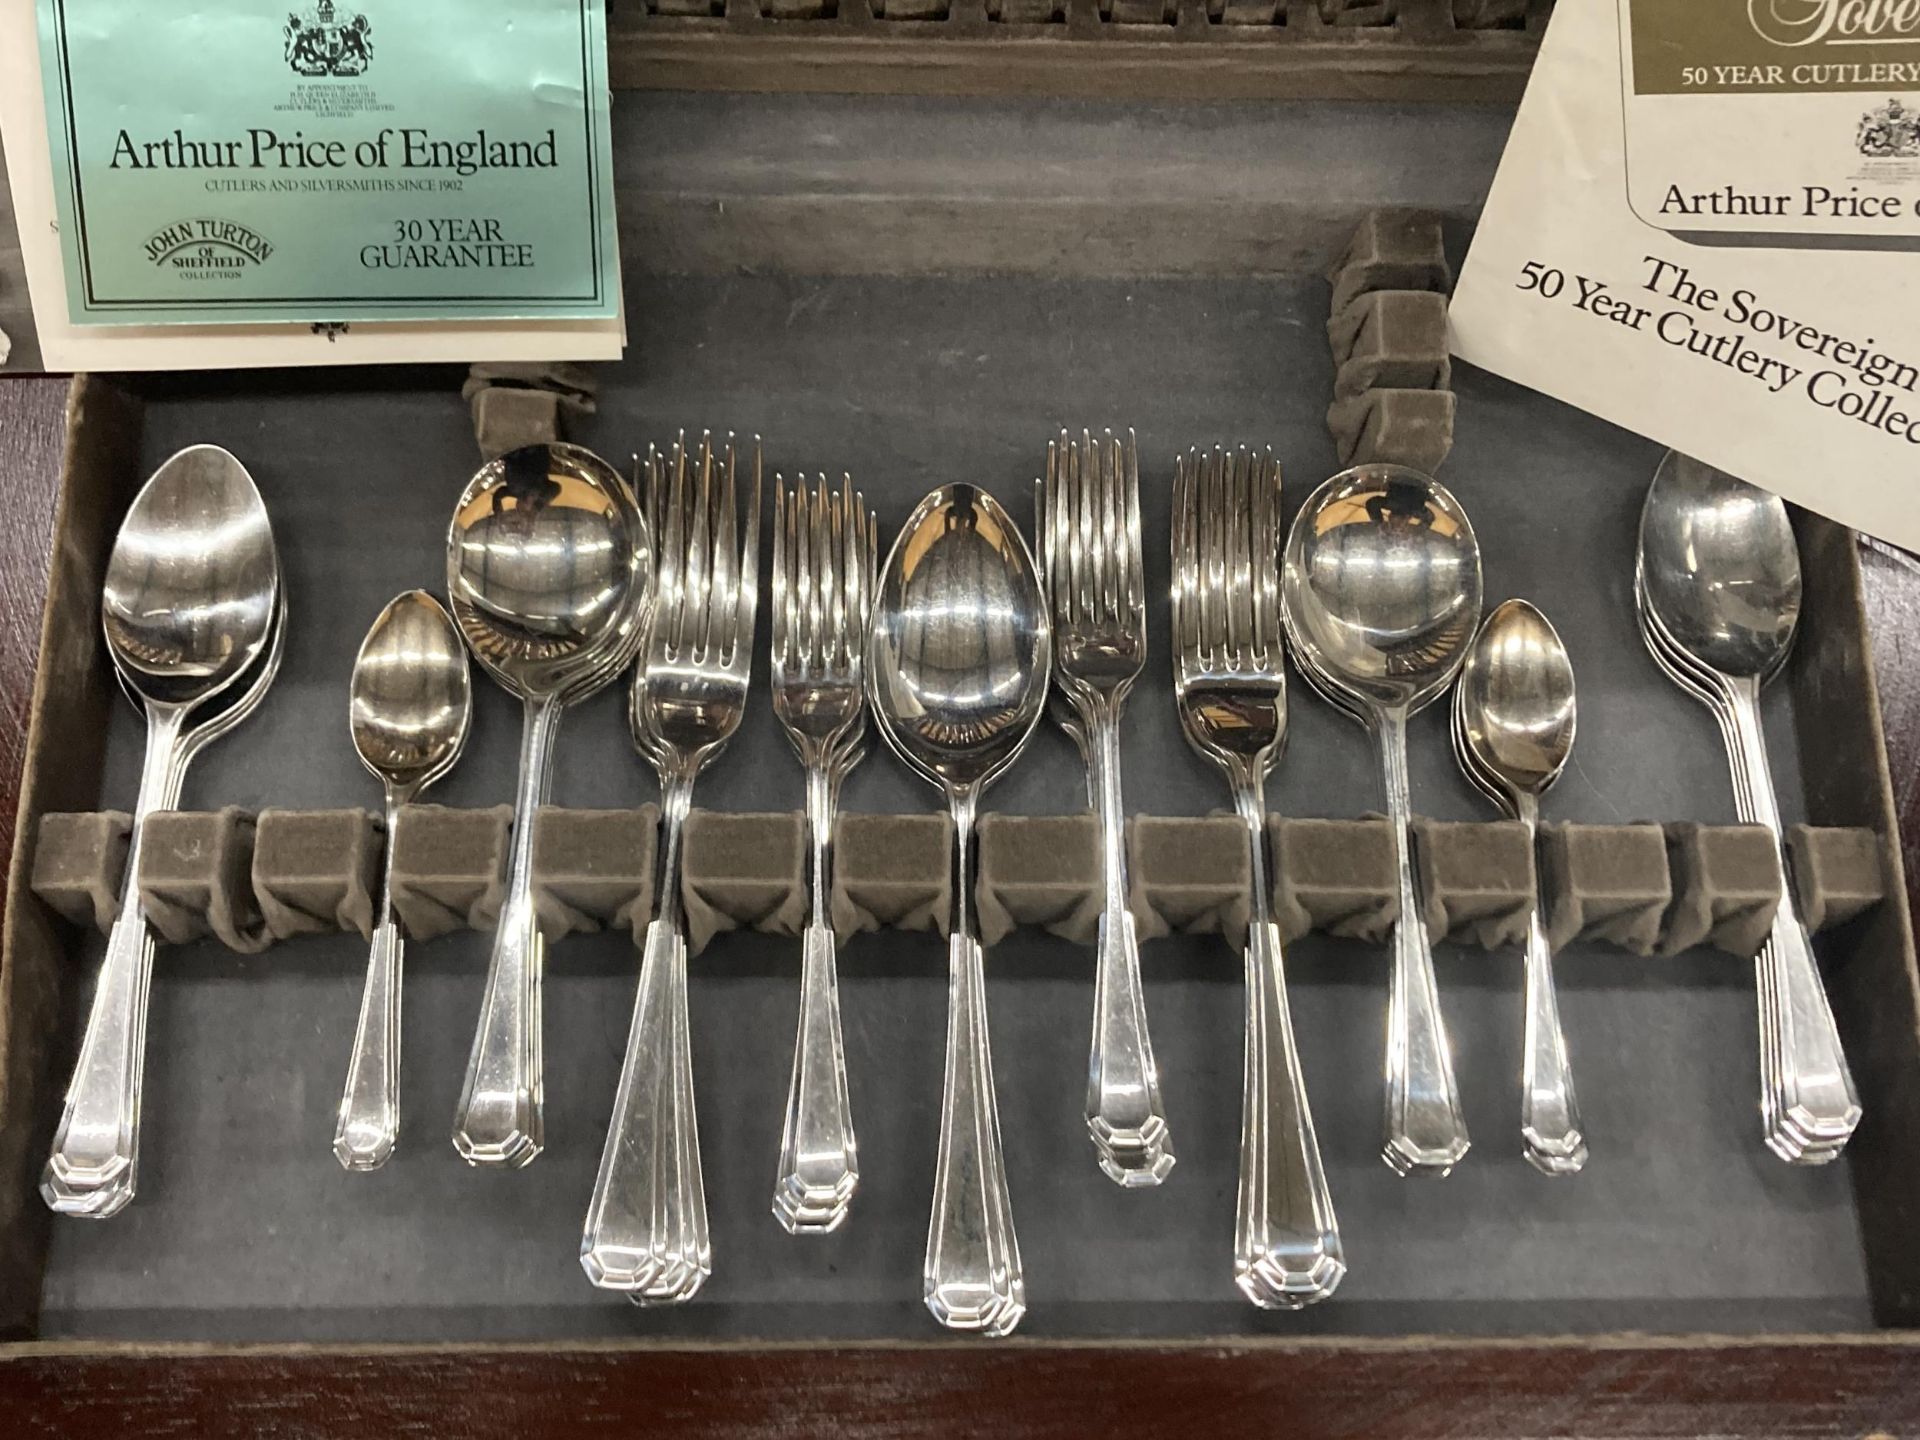 A BOXED ARTHUR PRICE OF ENGLAND CUTLERY SET WHICH COMES WITH A 30 YEAR GUARANTEE - Image 4 of 5